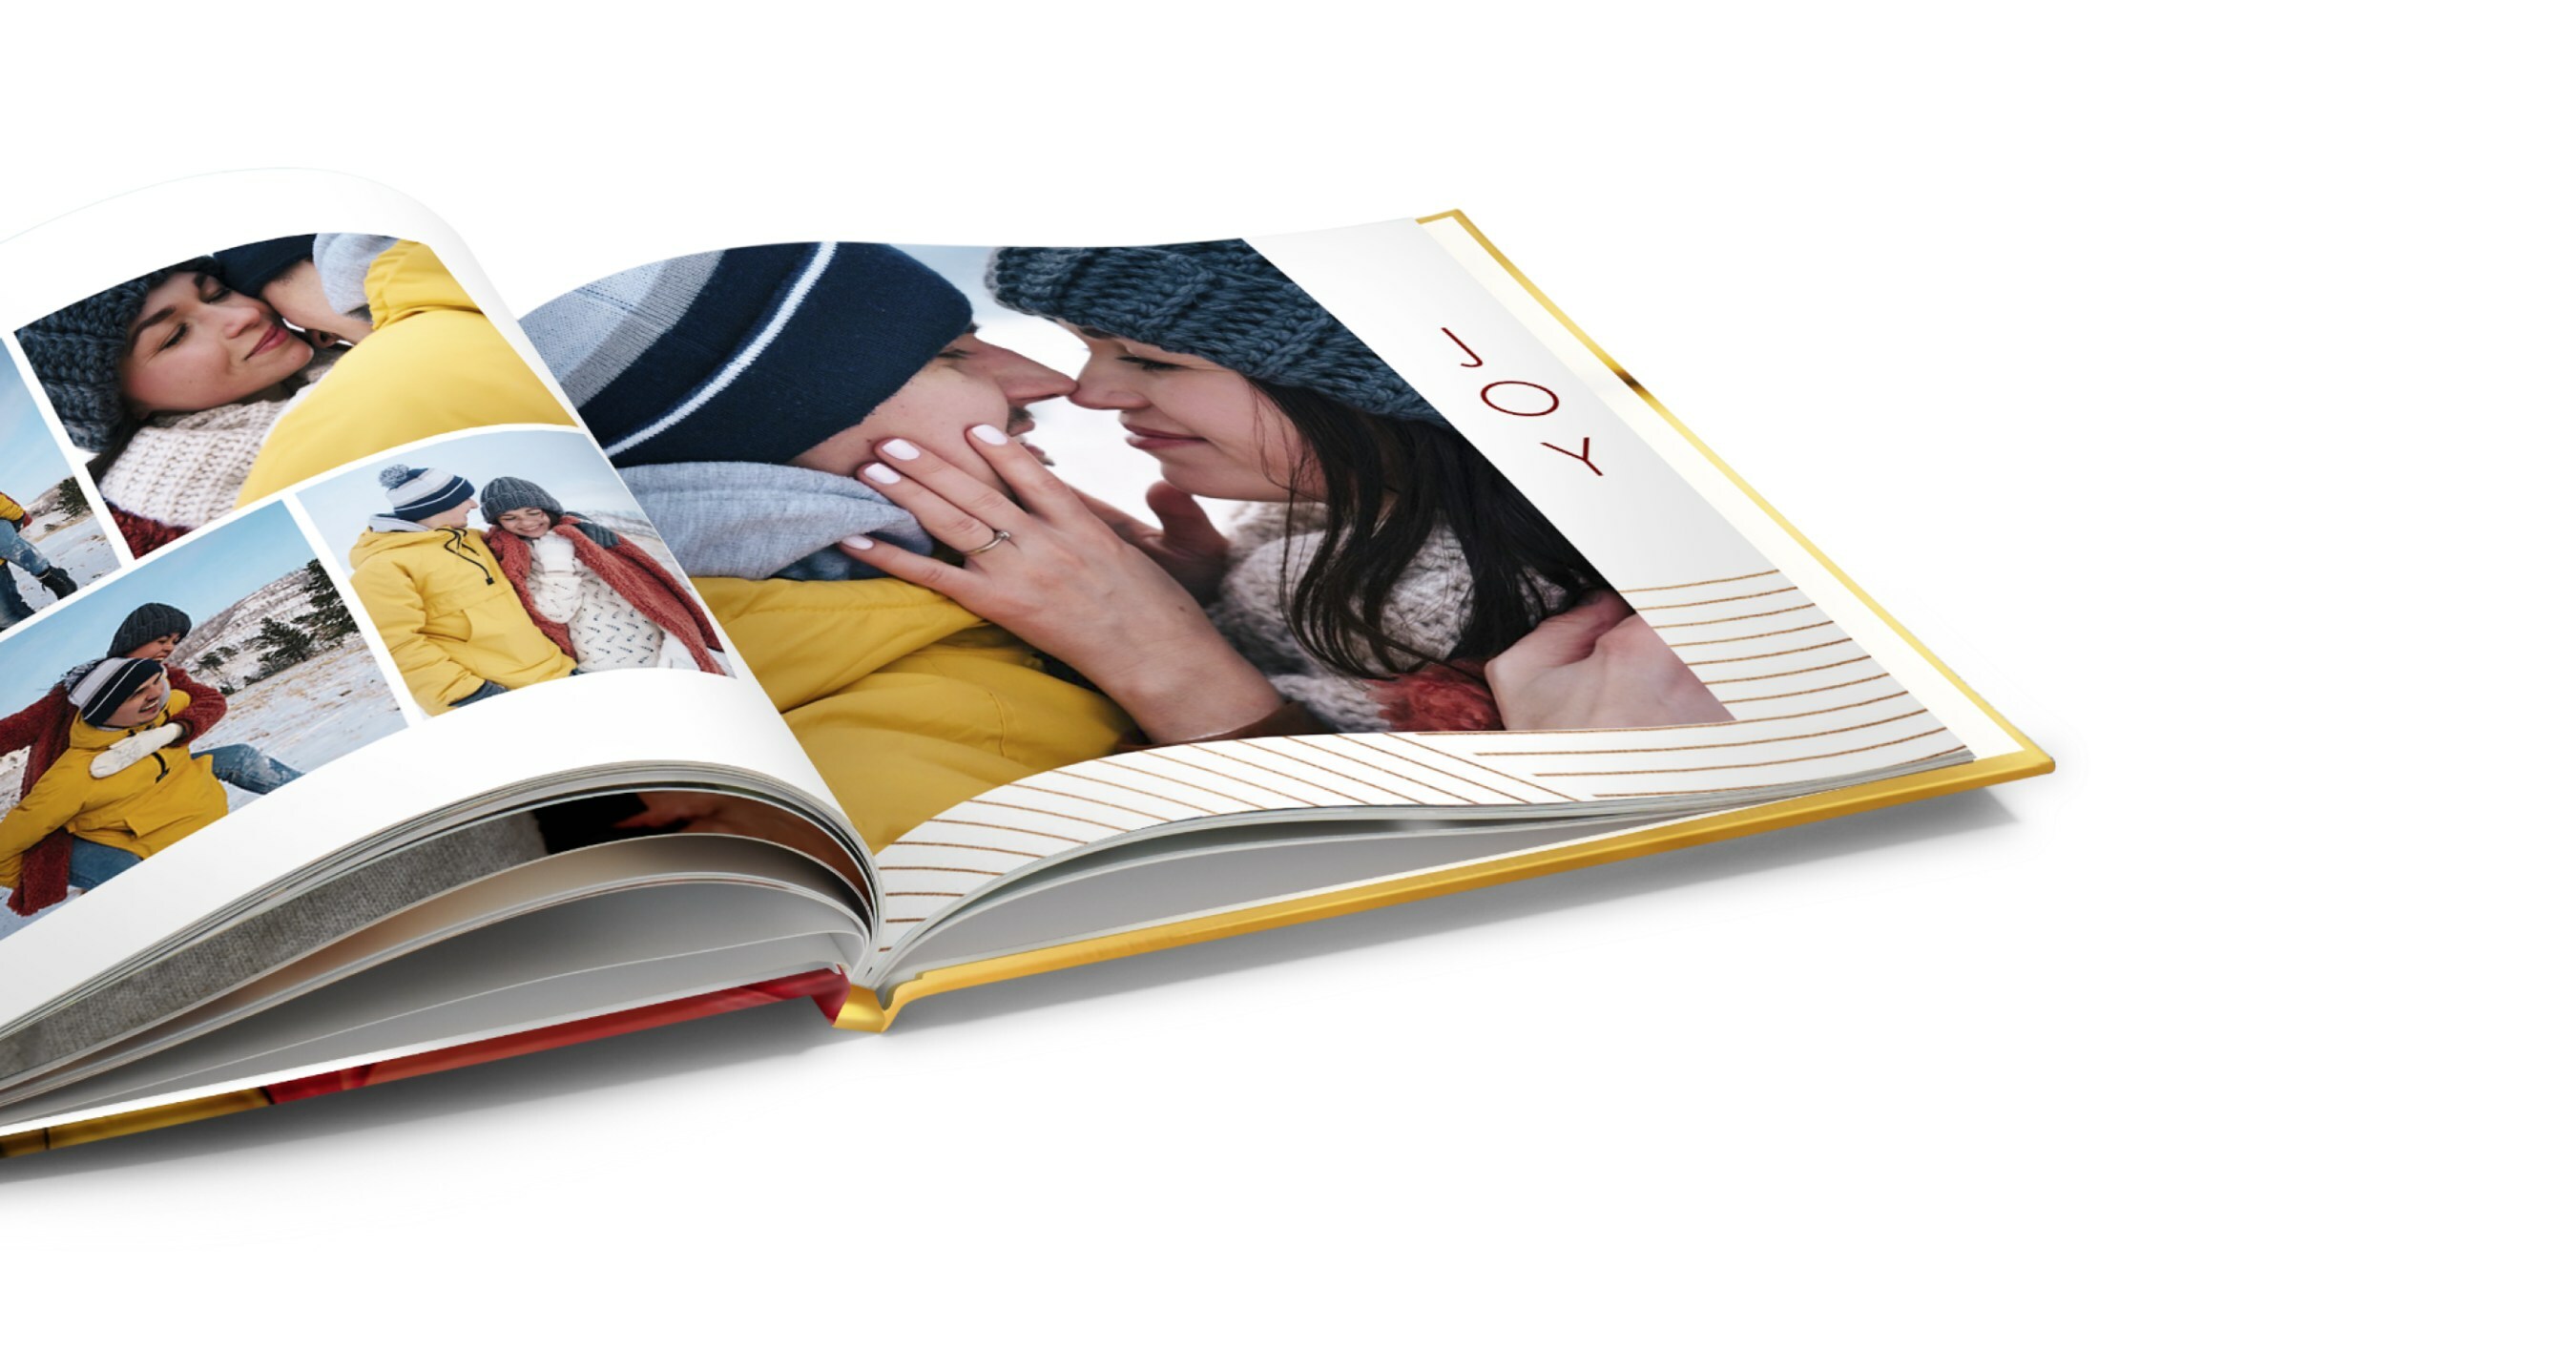 5 Best Photo Book Services to Use in 2023, From Shutterfly to Mixbook